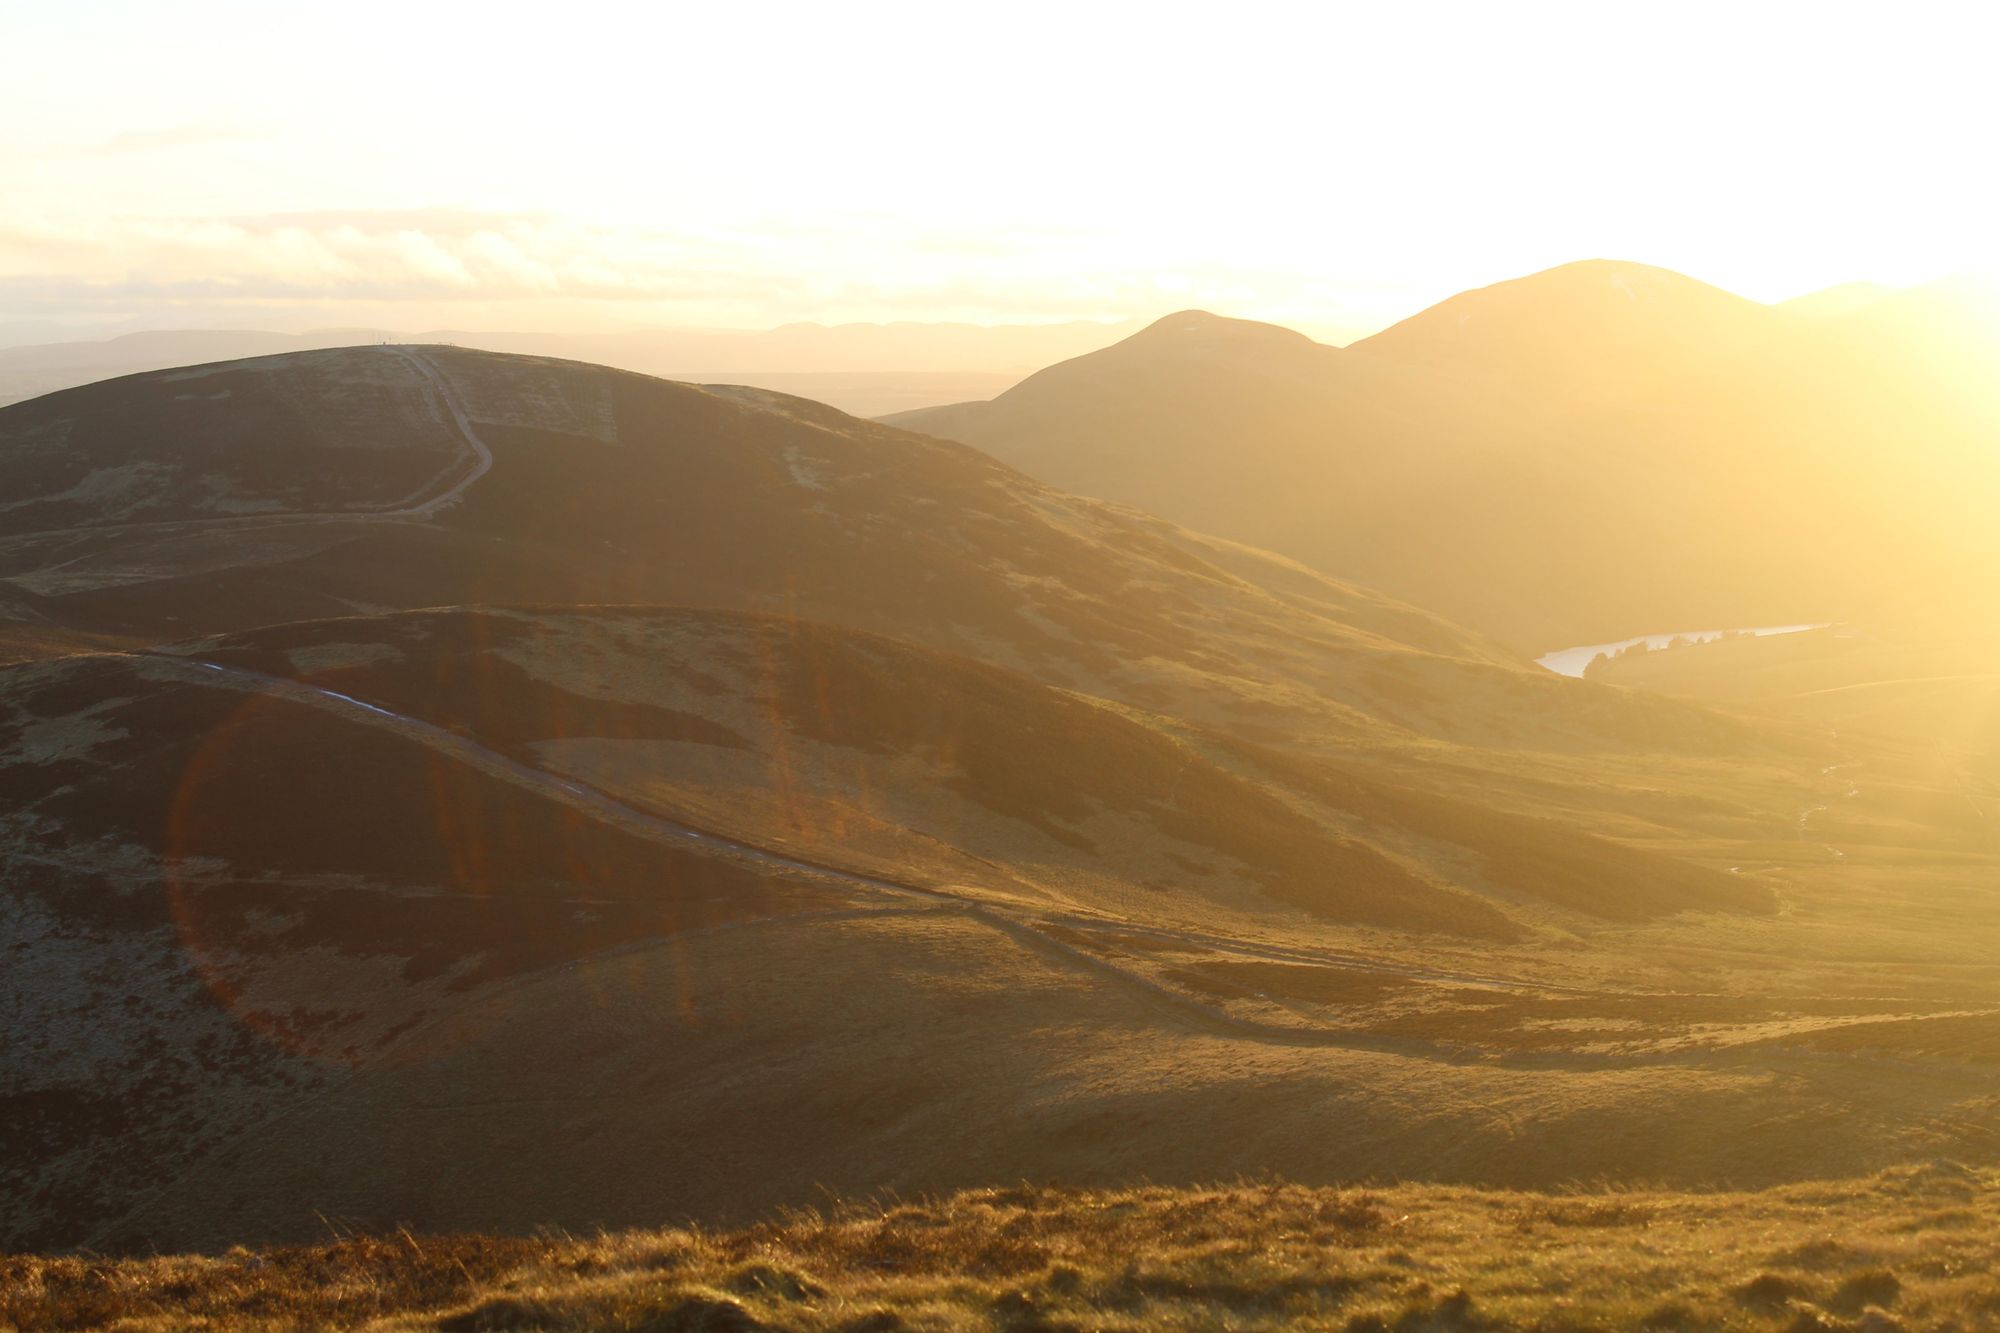 Golden hour in the Pentland Hills, pictured from the summit of Allermuir. Photo: Stuart Kenny